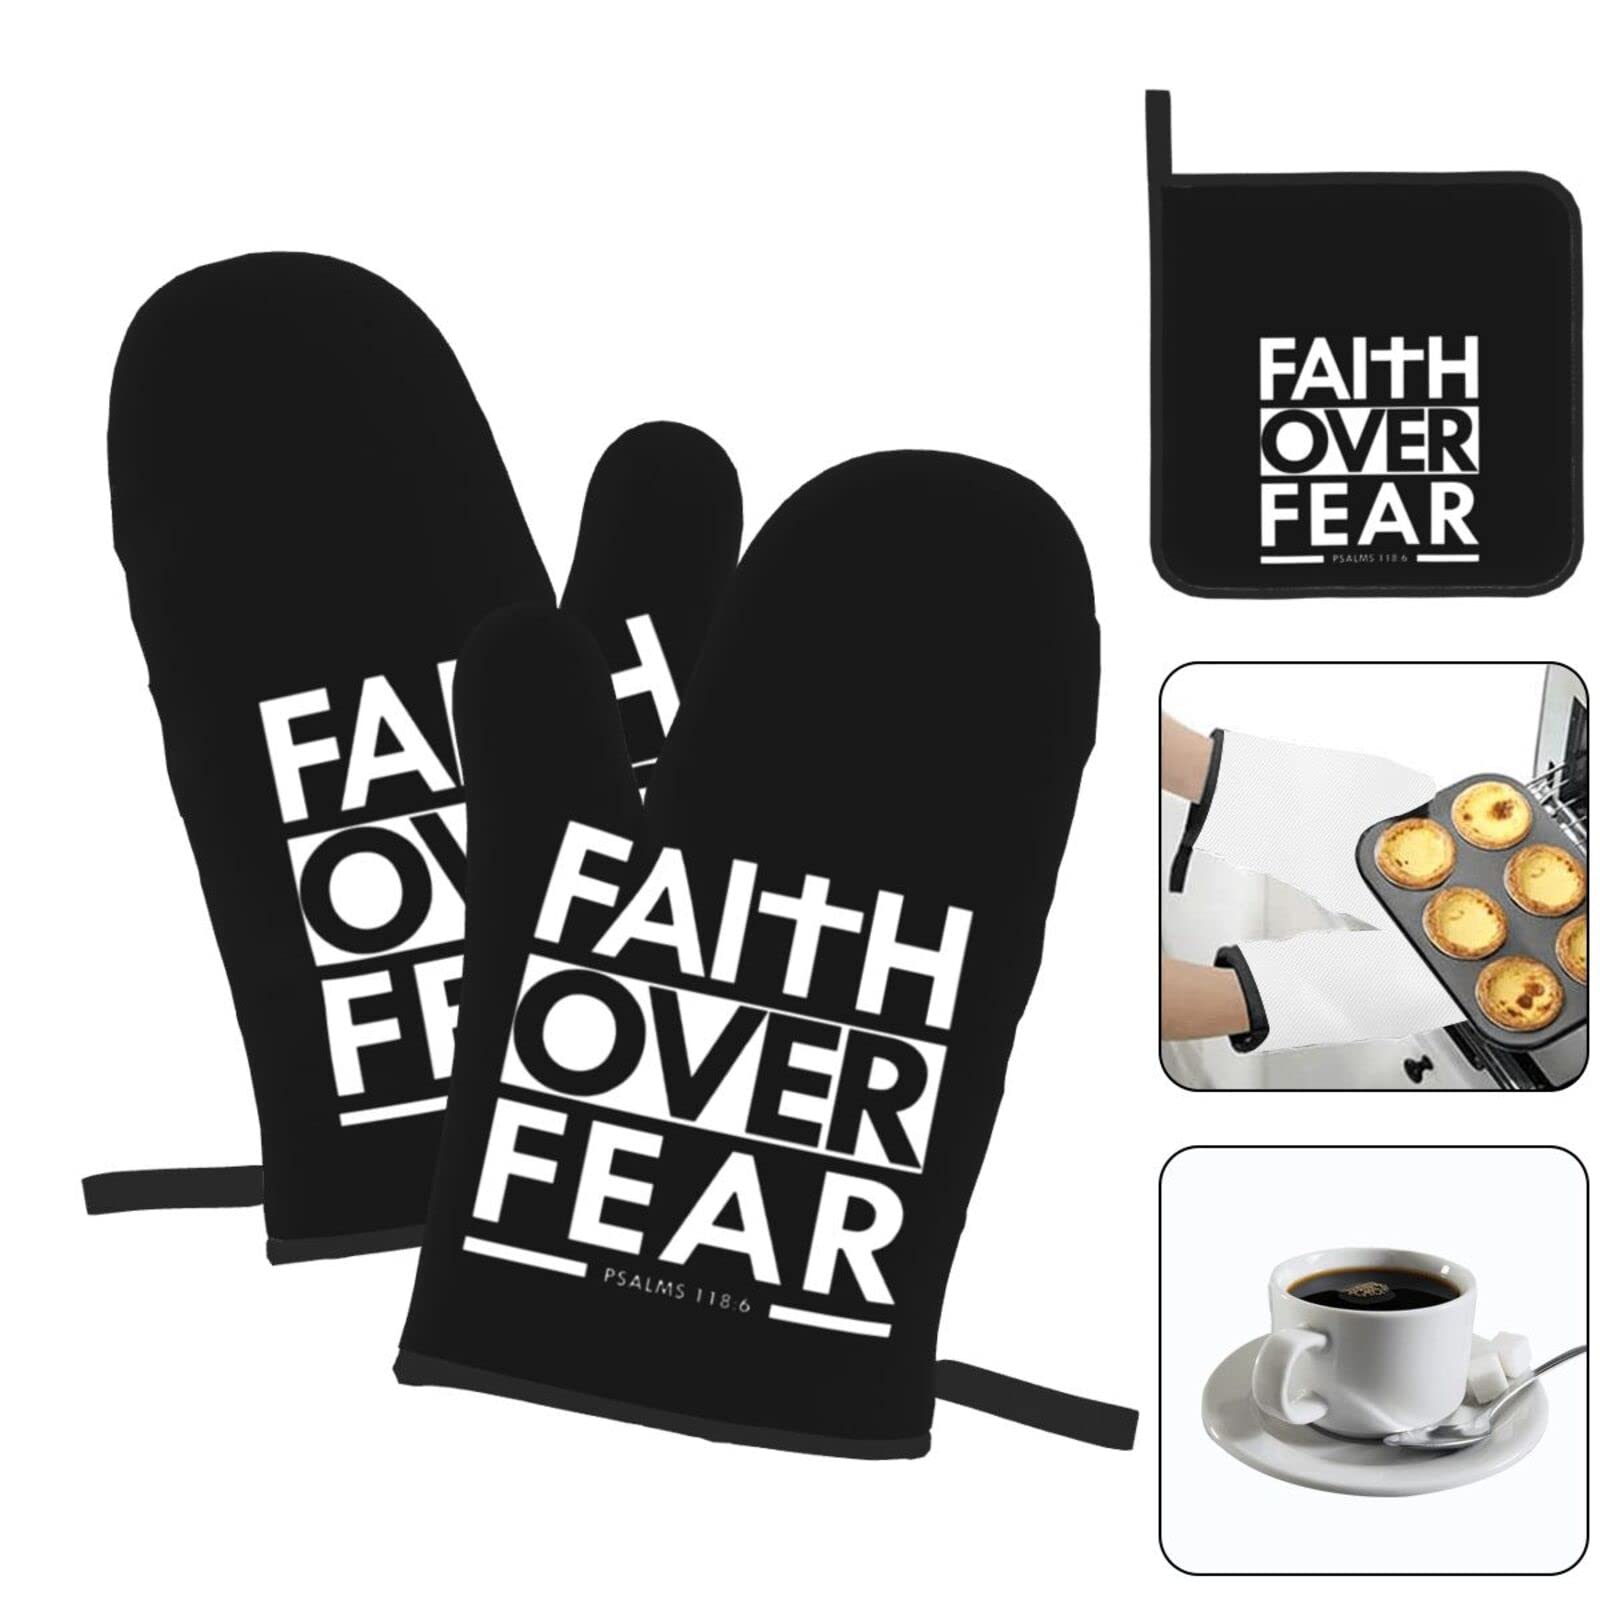 Faith Over Fear Bible Scripture Verse Christian Oven Mitts Pot Holders Sets Fashion Kitchen Heatproof Glove and Heat Insulated Pad